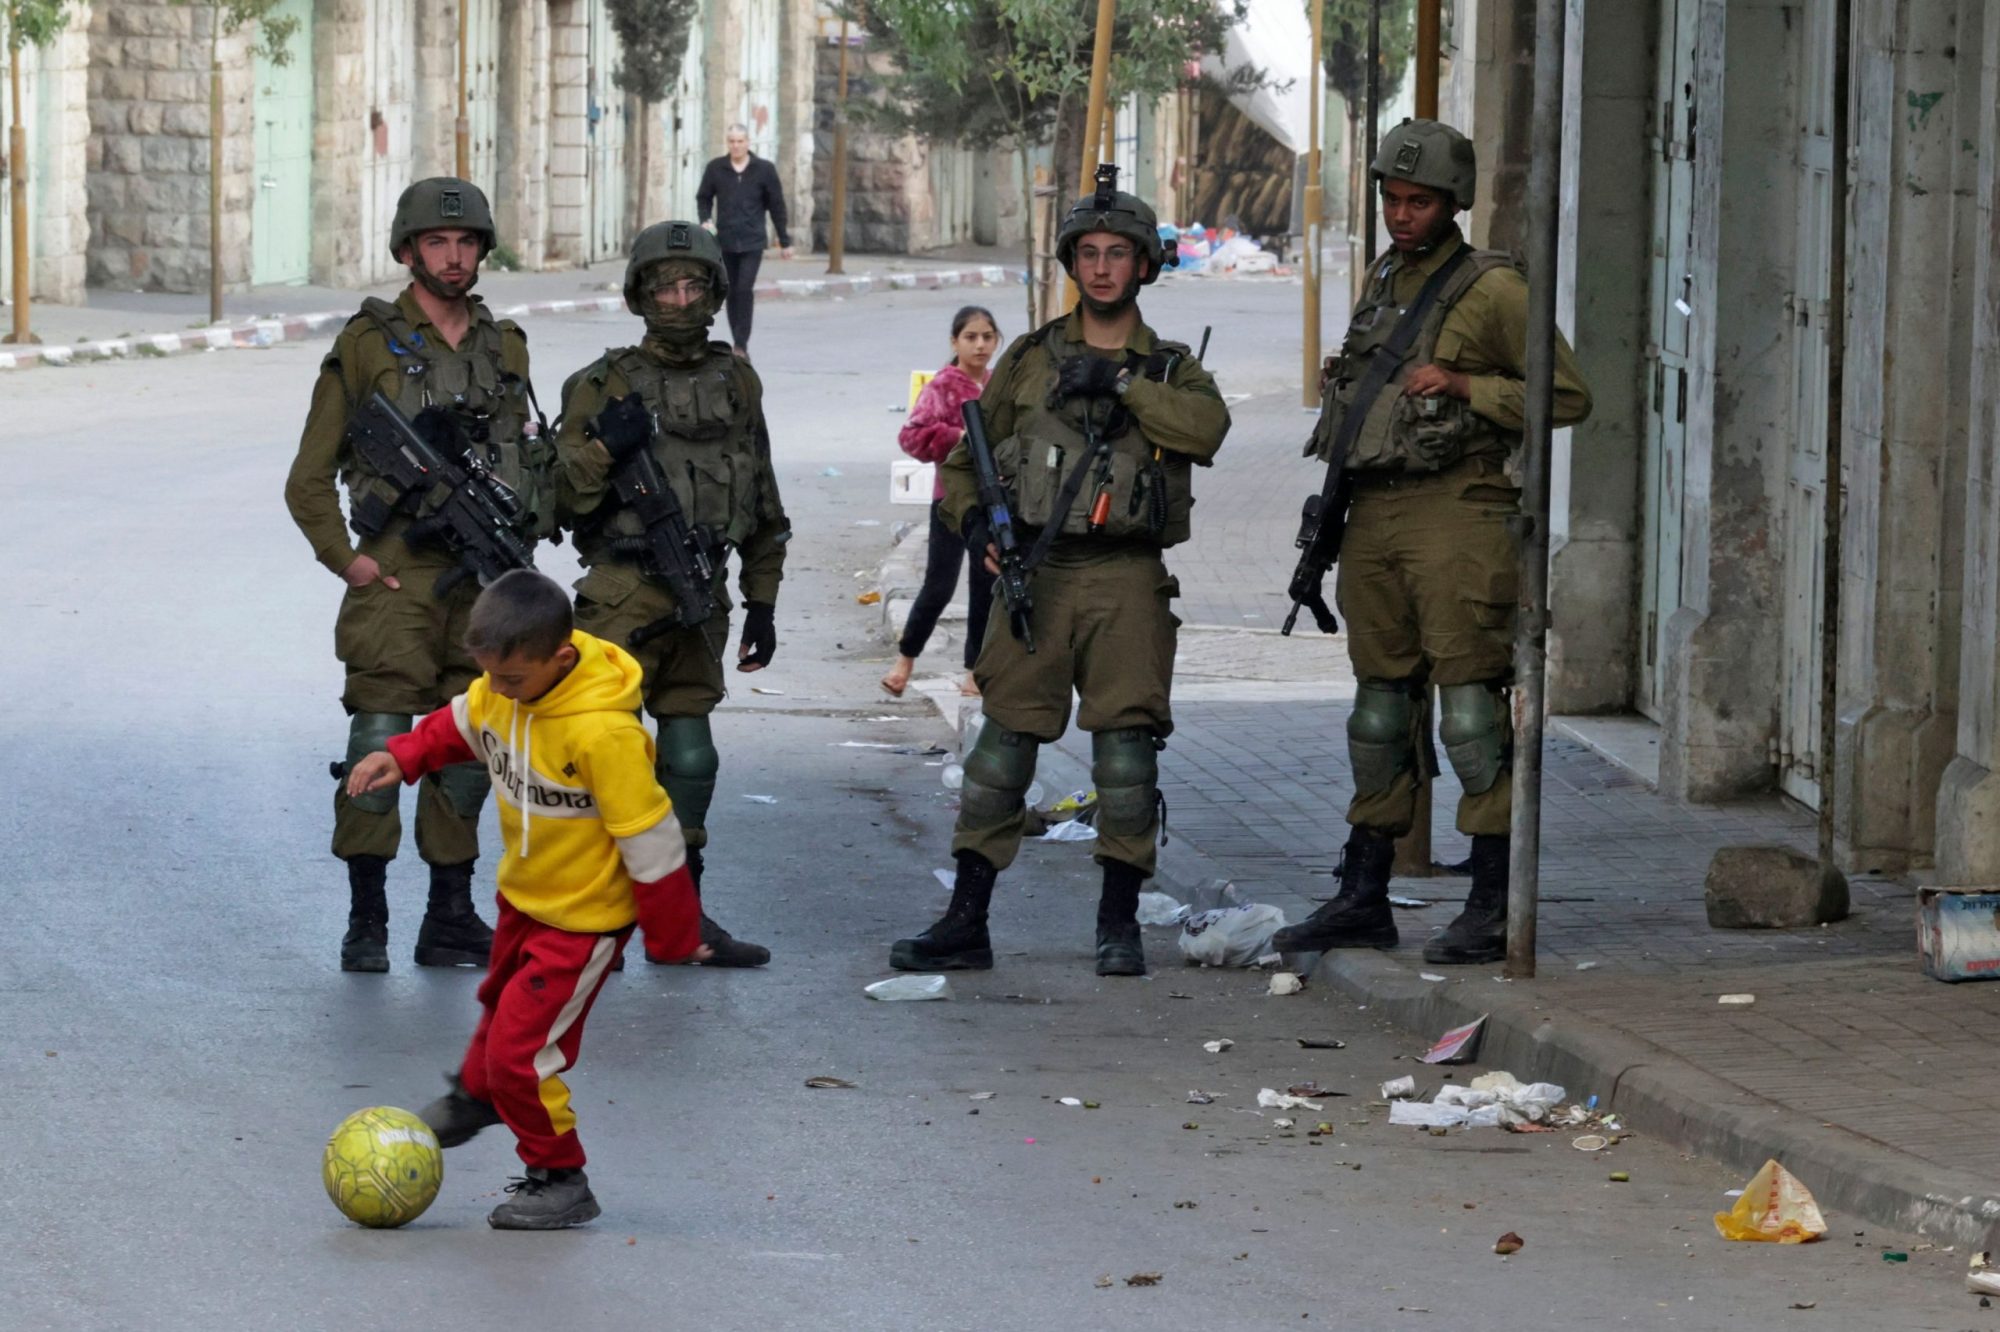 A small boy dribbles a soccer ball on a street as four armored Israeli soldiers carrying automatic weapons stand behind him and watch.